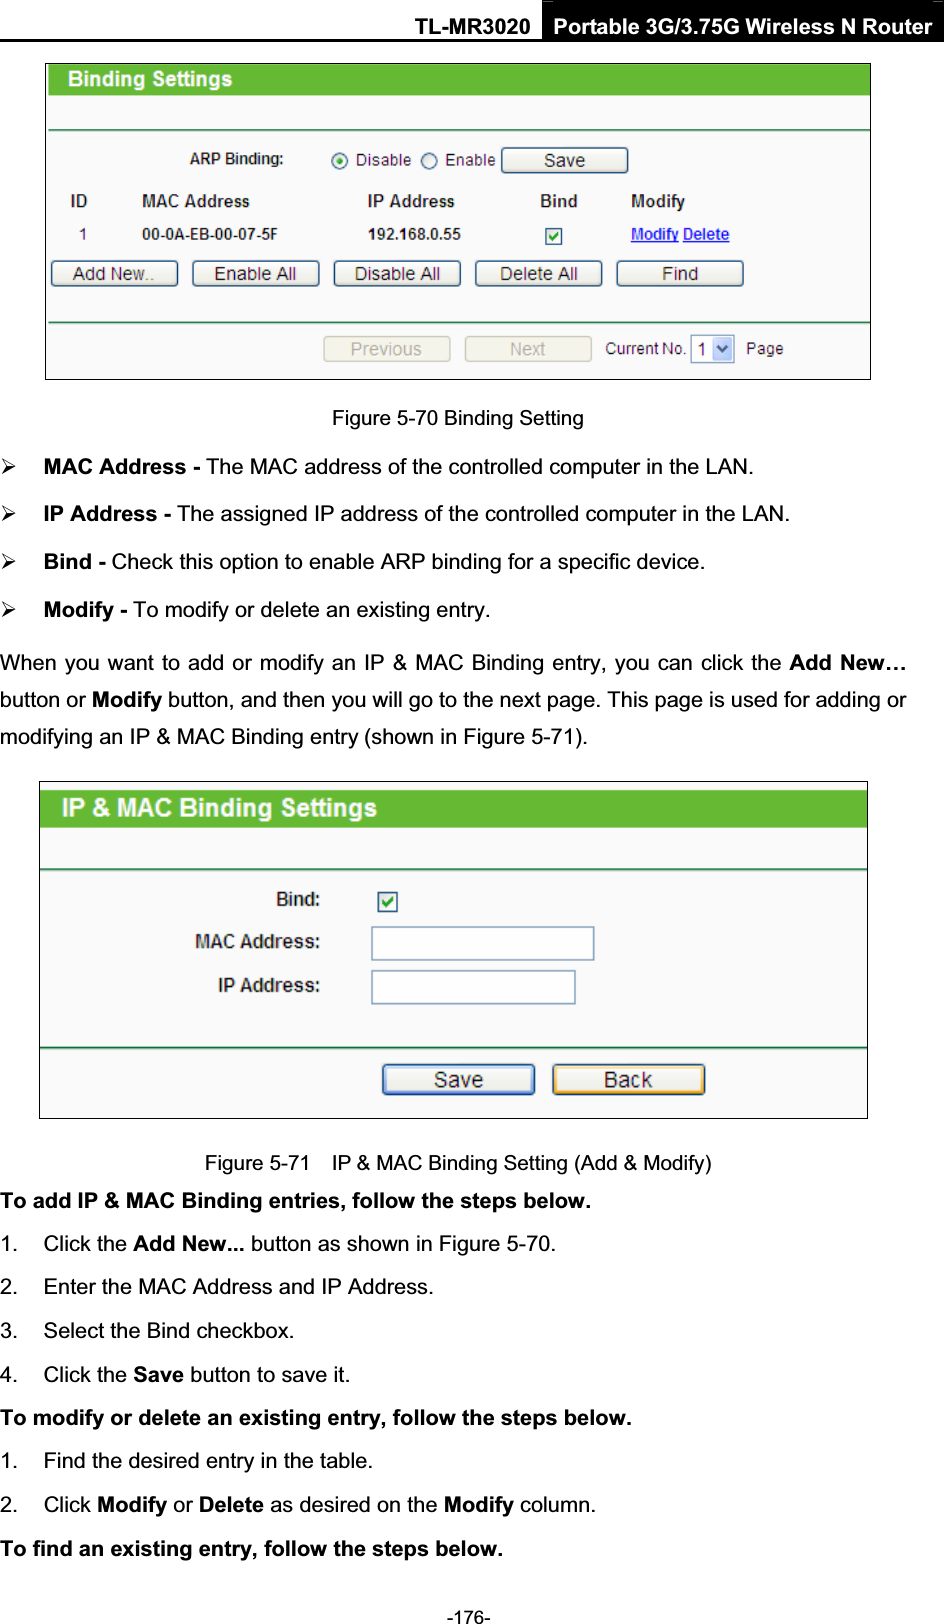 TL-MR3020 Portable 3G/3.75G Wireless N Router-176-Figure 5-70 Binding Setting ¾MAC Address - The MAC address of the controlled computer in the LAN.   ¾IP Address - The assigned IP address of the controlled computer in the LAN.   ¾Bind - Check this option to enable ARP binding for a specific device.   ¾Modify - To modify or delete an existing entry.   When you want to add or modify an IP &amp; MAC Binding entry, you can click the Add New…button or Modify button, and then you will go to the next page. This page is used for adding or modifying an IP &amp; MAC Binding entry (shown in Figure 5-71).     Figure 5-71    IP &amp; MAC Binding Setting (Add &amp; Modify) To add IP &amp; MAC Binding entries, follow the steps below. 1.  Click the Add New... button as shown in Figure 5-70.   2.  Enter the MAC Address and IP Address. 3. Select the Bind checkbox. 4.  Click the Save button to save it. To modify or delete an existing entry, follow the steps below.1.  Find the desired entry in the table.   2.  Click Modify or Delete as desired on the Modify column.   To find an existing entry, follow the steps below.